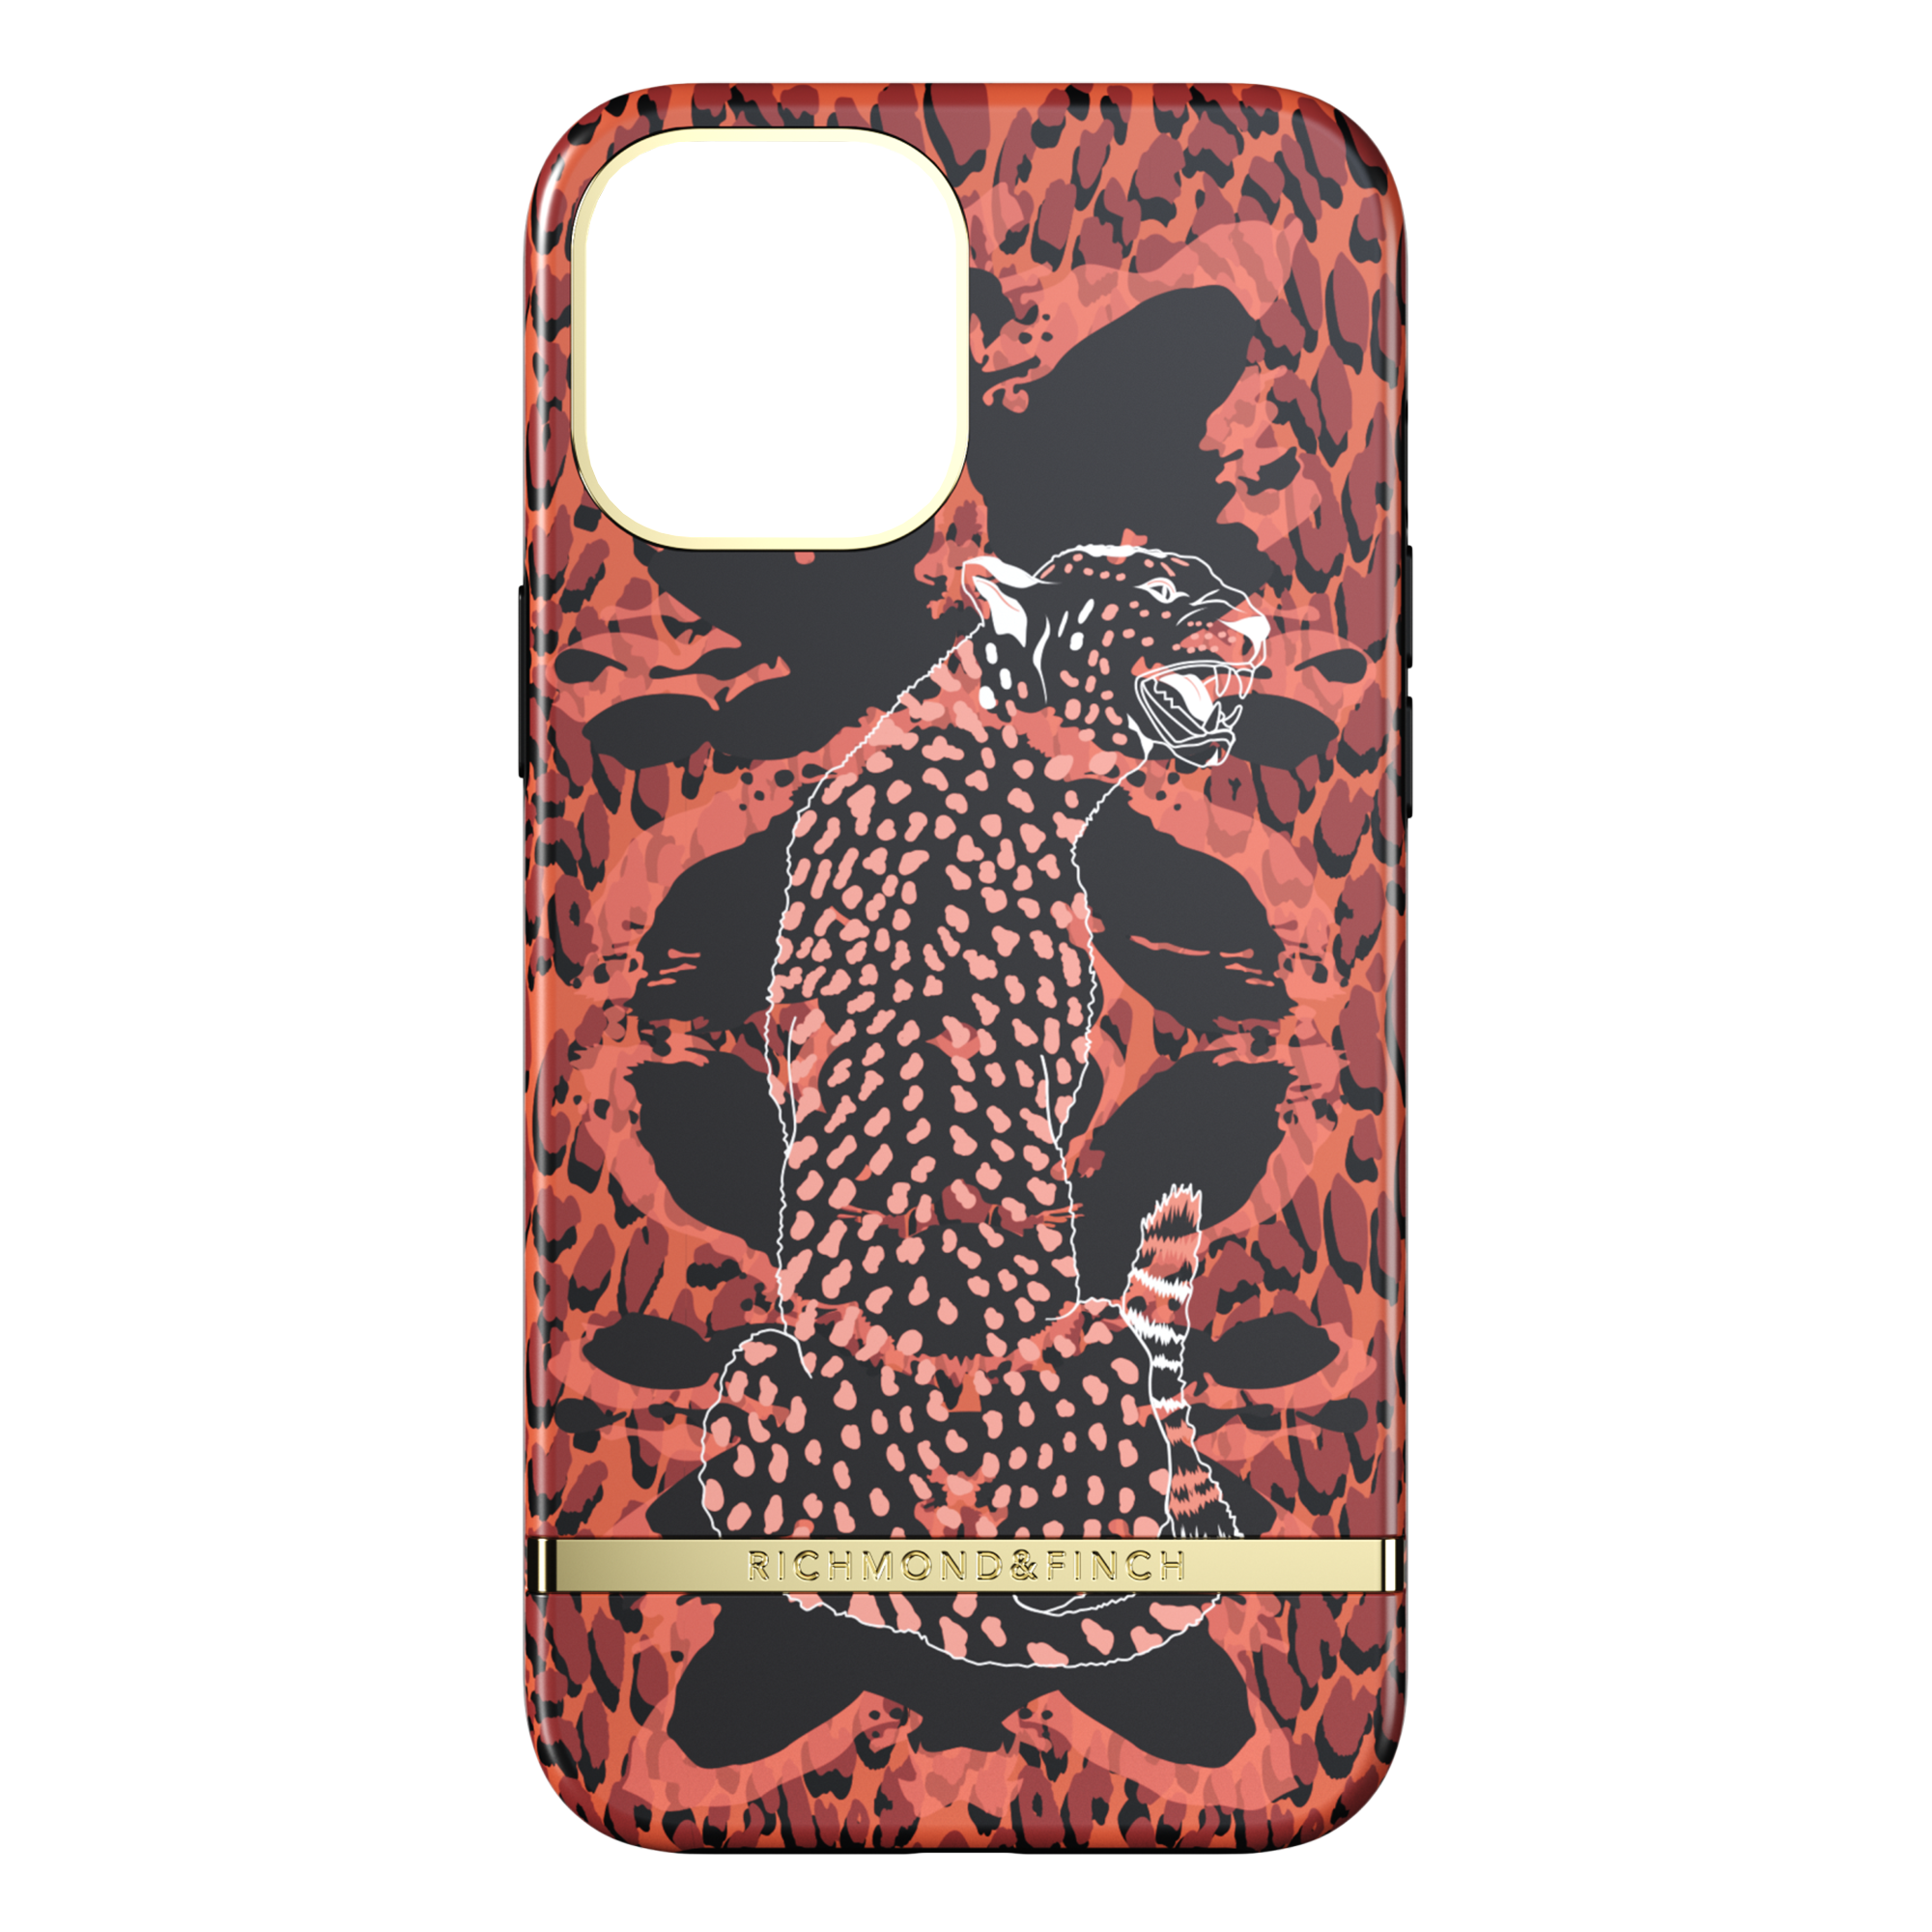 12 iPhone iPhone Apple, Amber & FINCH Gepard, Backcover, Rot Max, Pro Tasche RICHMOND